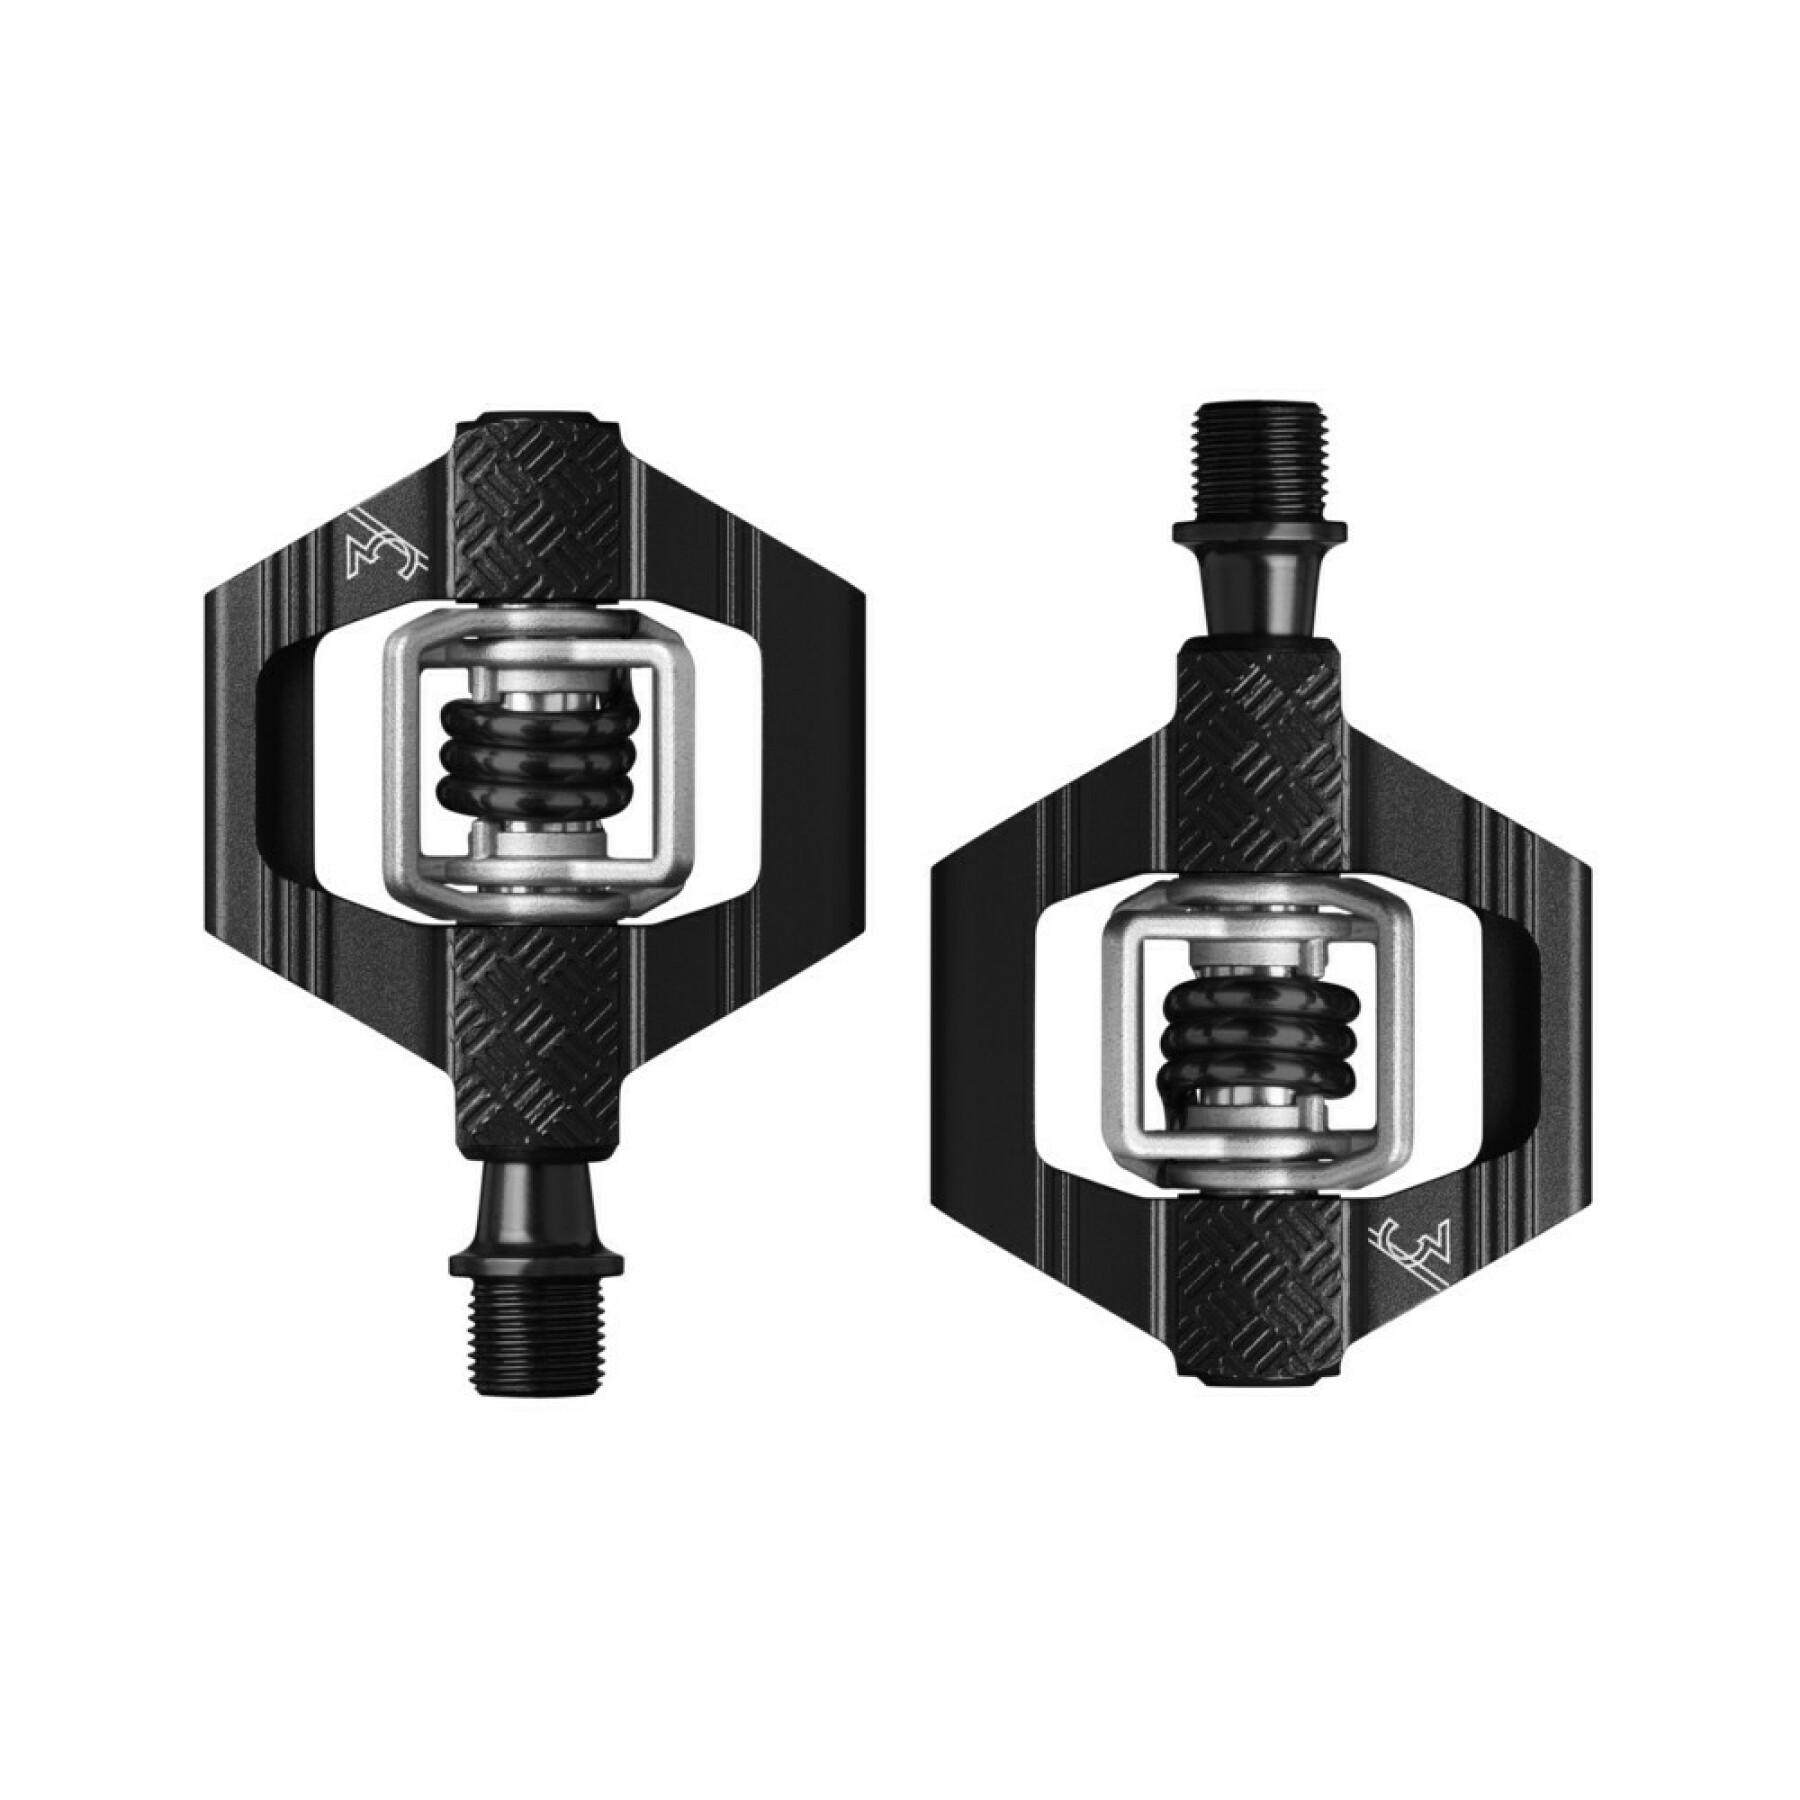 Pedals crankbrothers candy 2